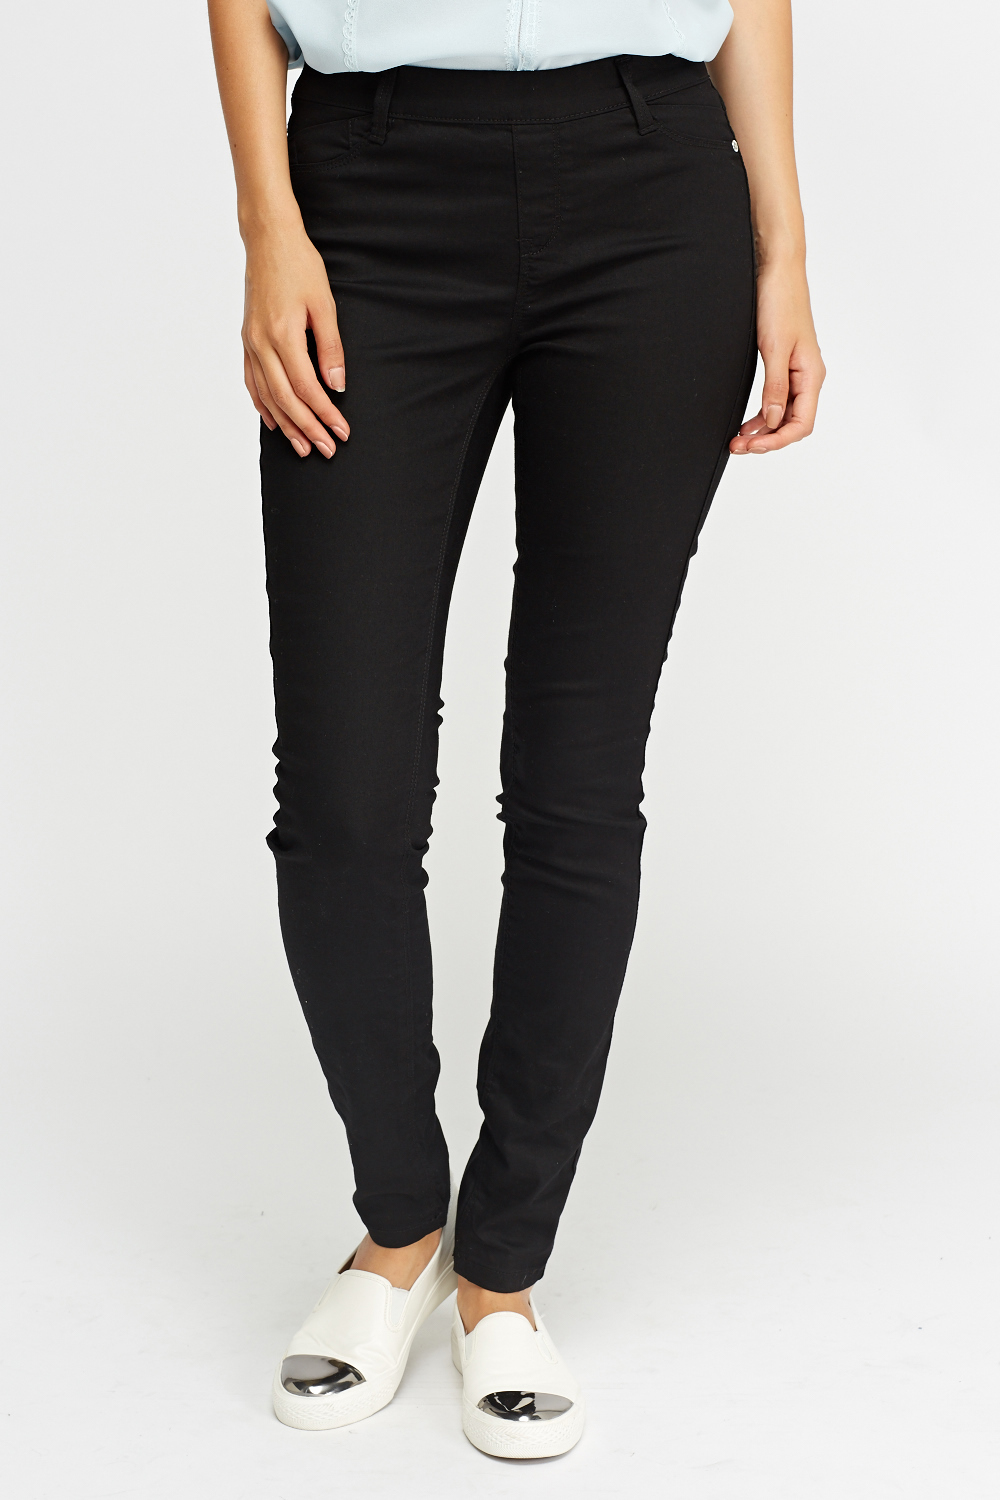 Black Fitted Jeggings - Just $3